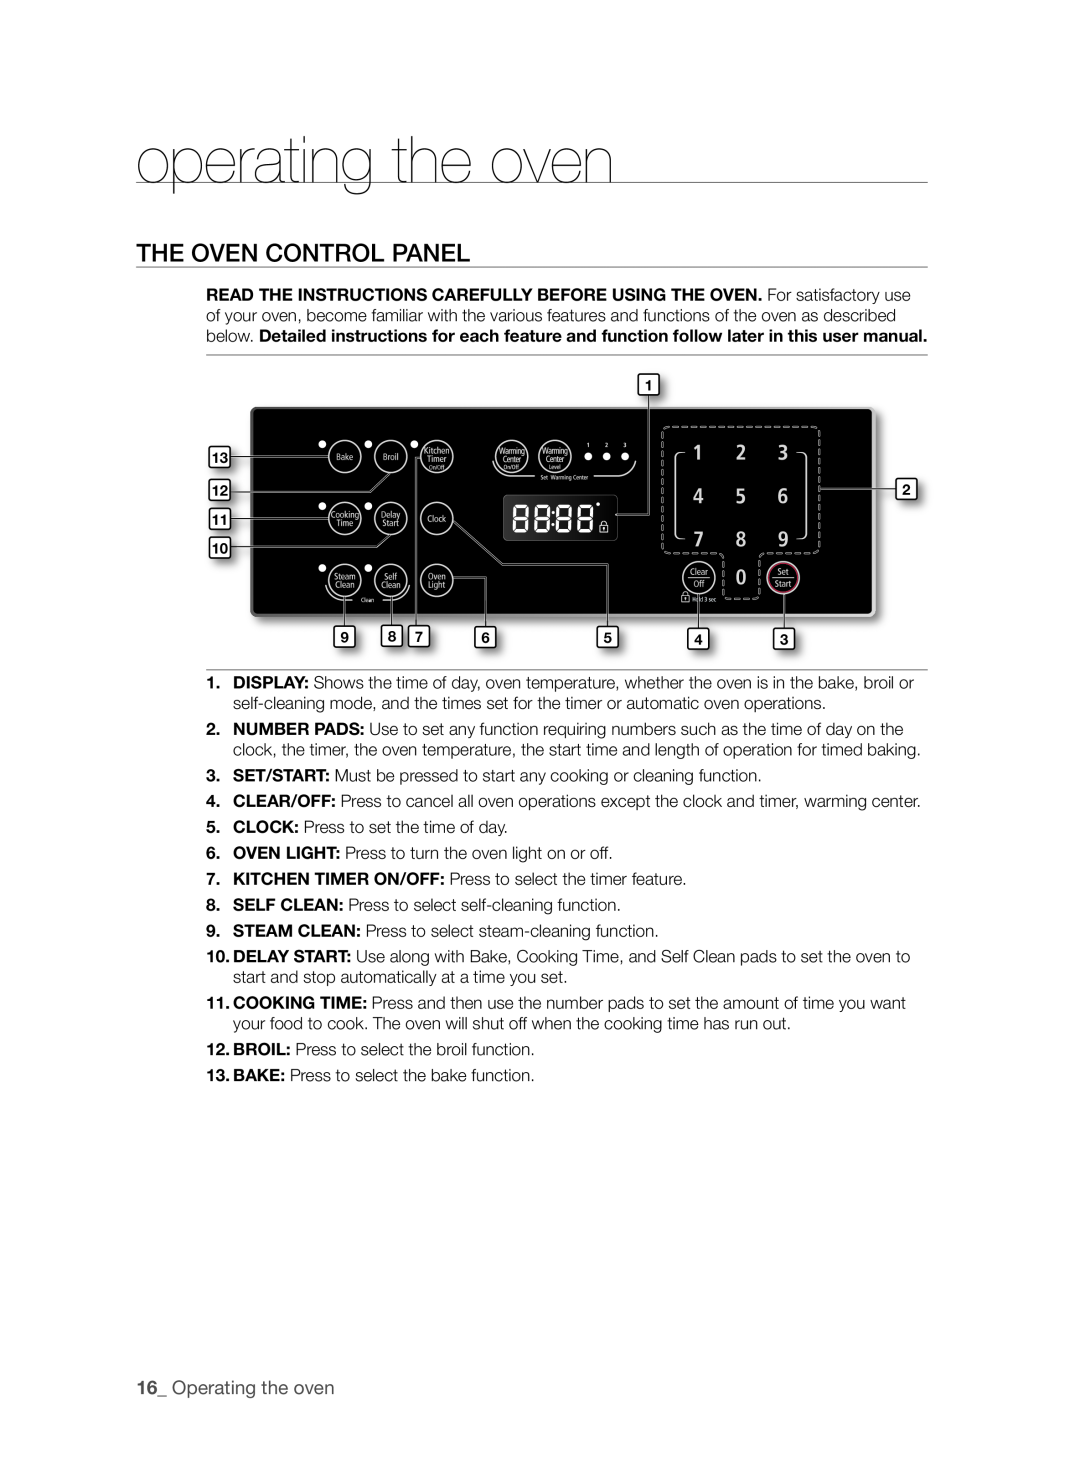 Samsung FCQ321HTUB, FCQ321HTUW, FCQ321HTUX user manual operating the oven, The Oven Control Panel, 1 Operating the oven 